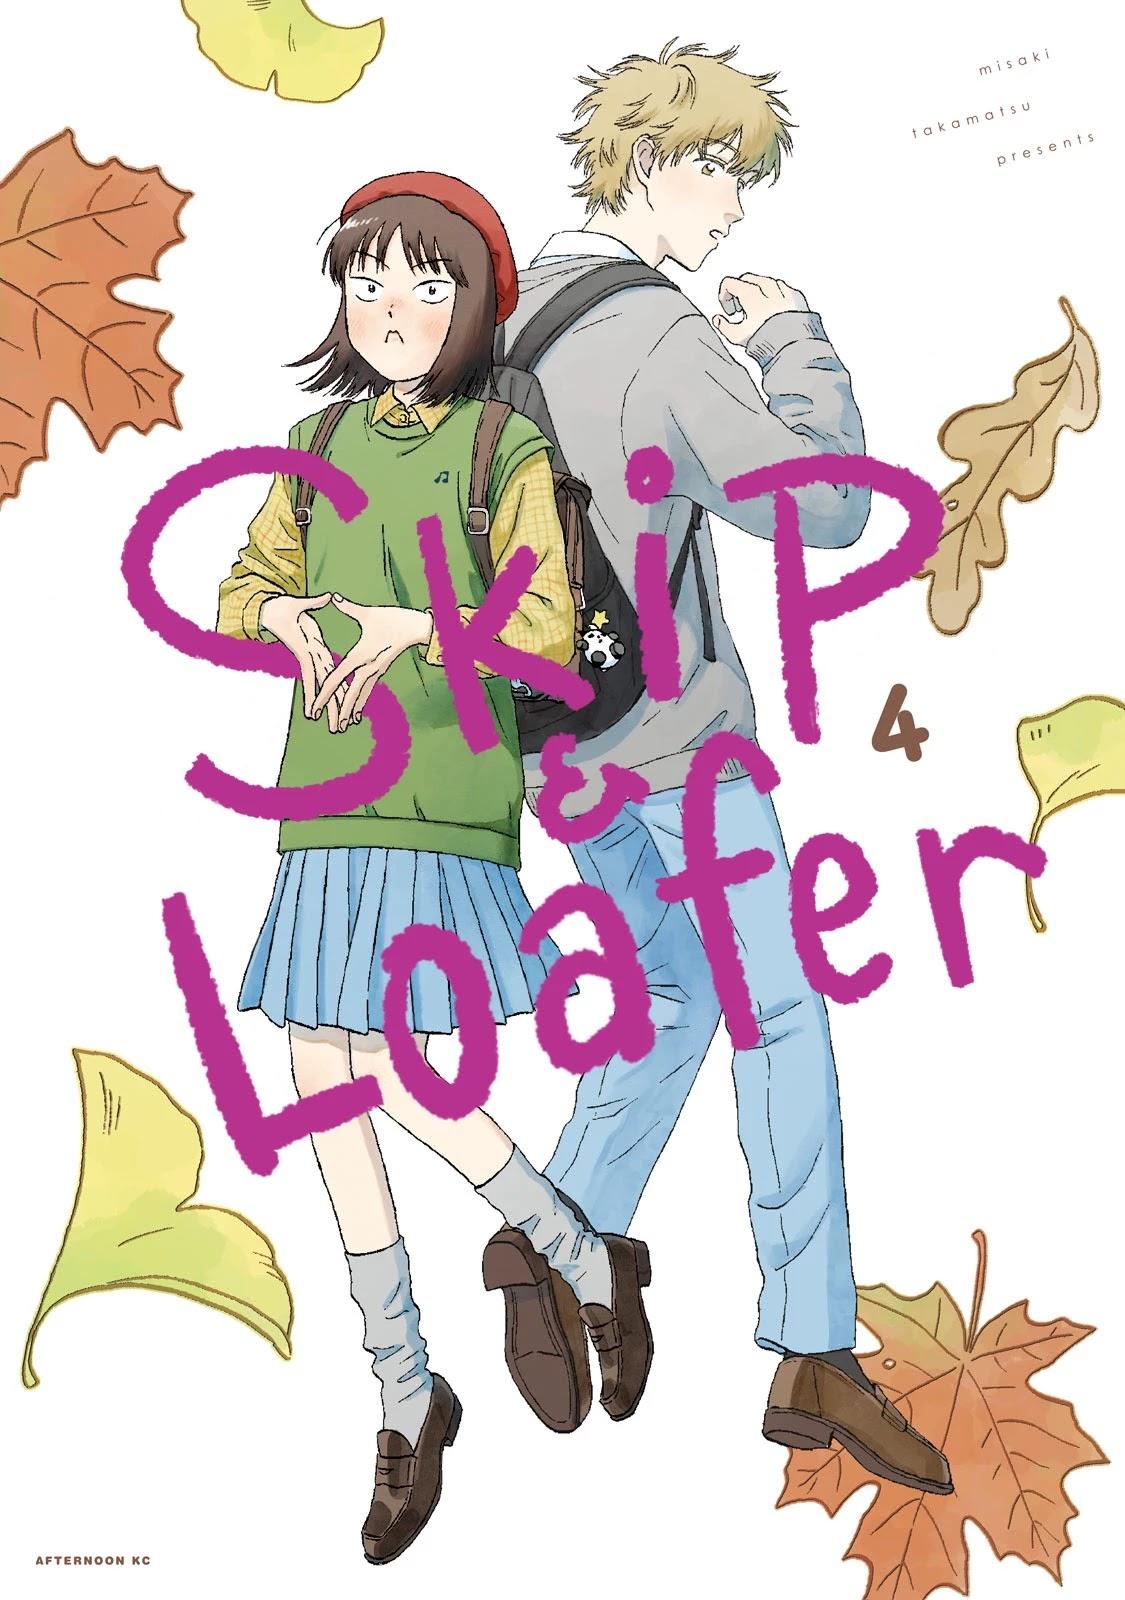 Read Skip To Loafer Chapter 56: Weary Road Home on Mangakakalot